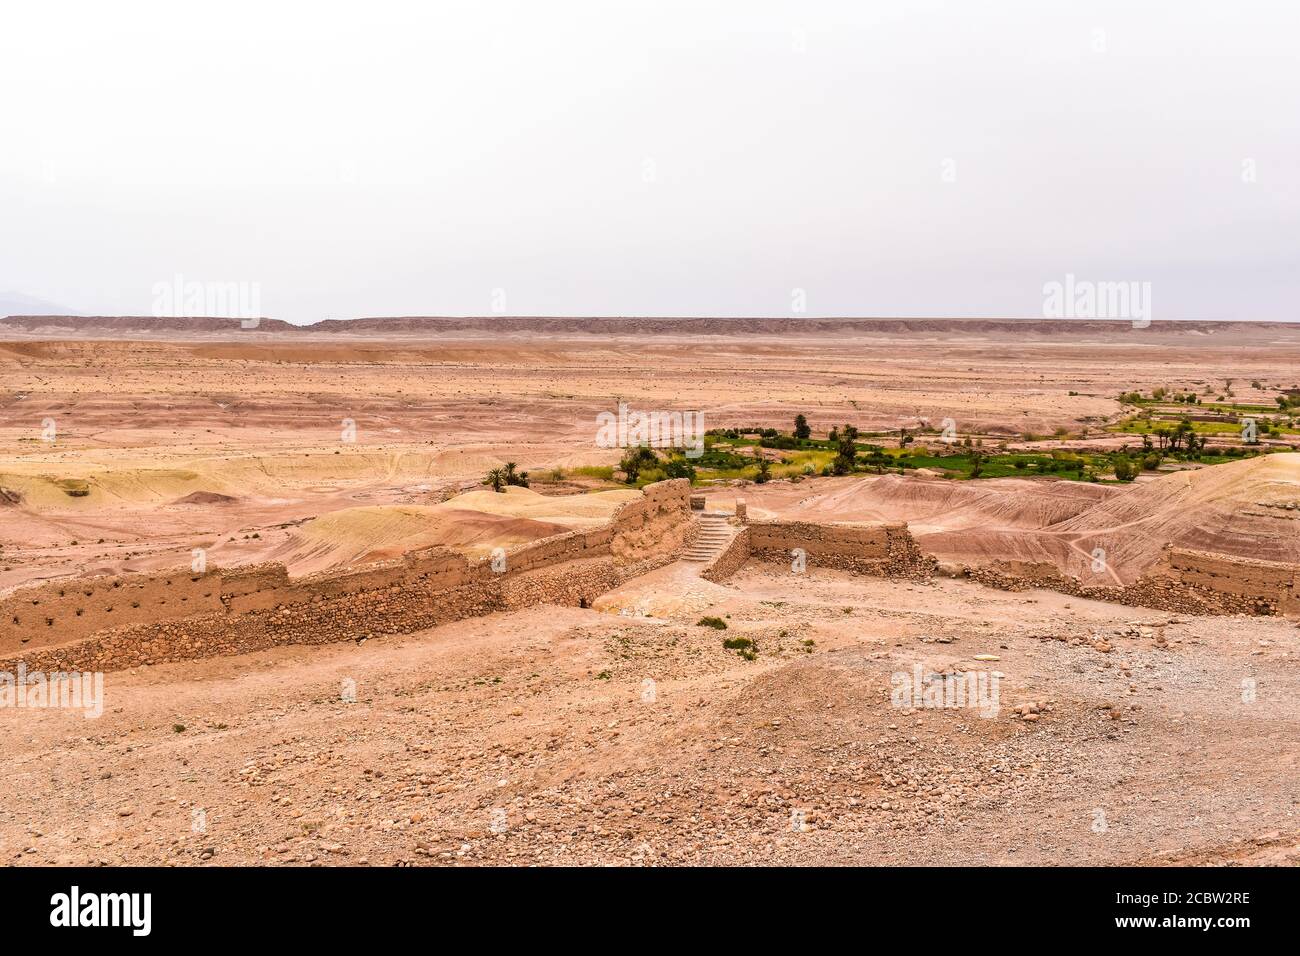 The view of a barren landscape from Ait Benhaddou Stock Photo